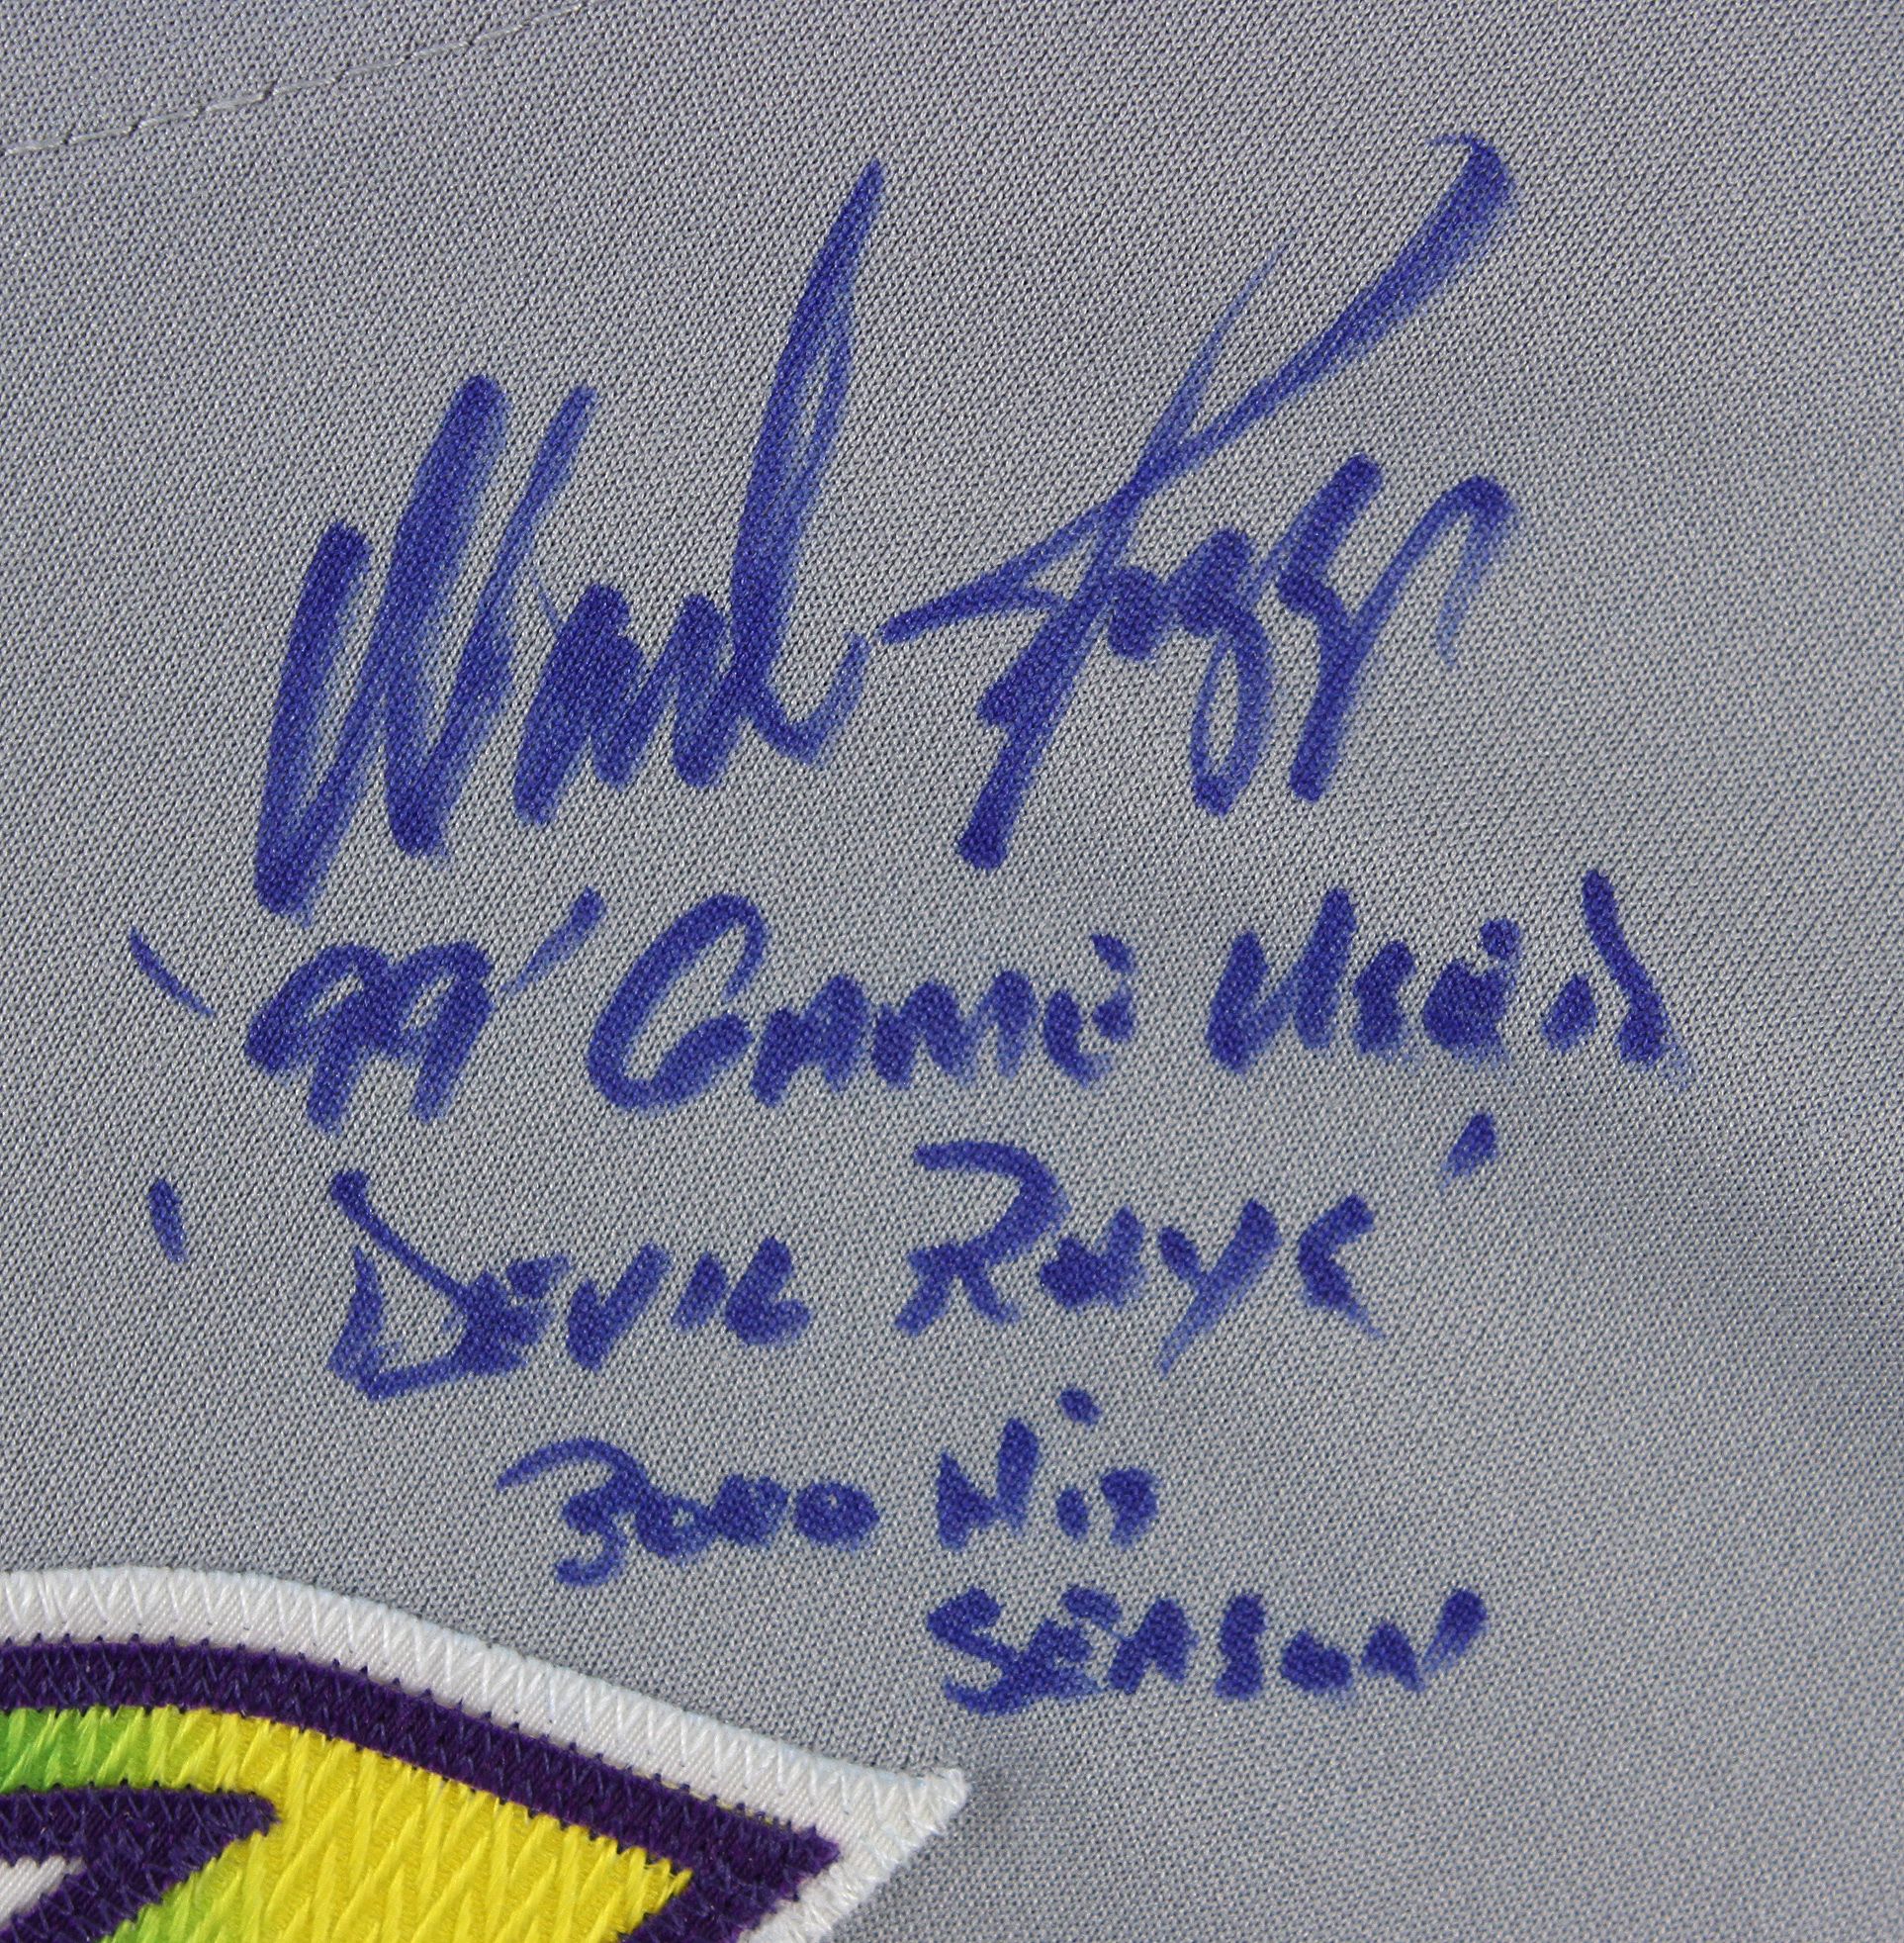 Wade Boggs Signed Tampa Bay Devil Rays Jersey (JSA COA) 3000 Hit Club as a  D-Ray